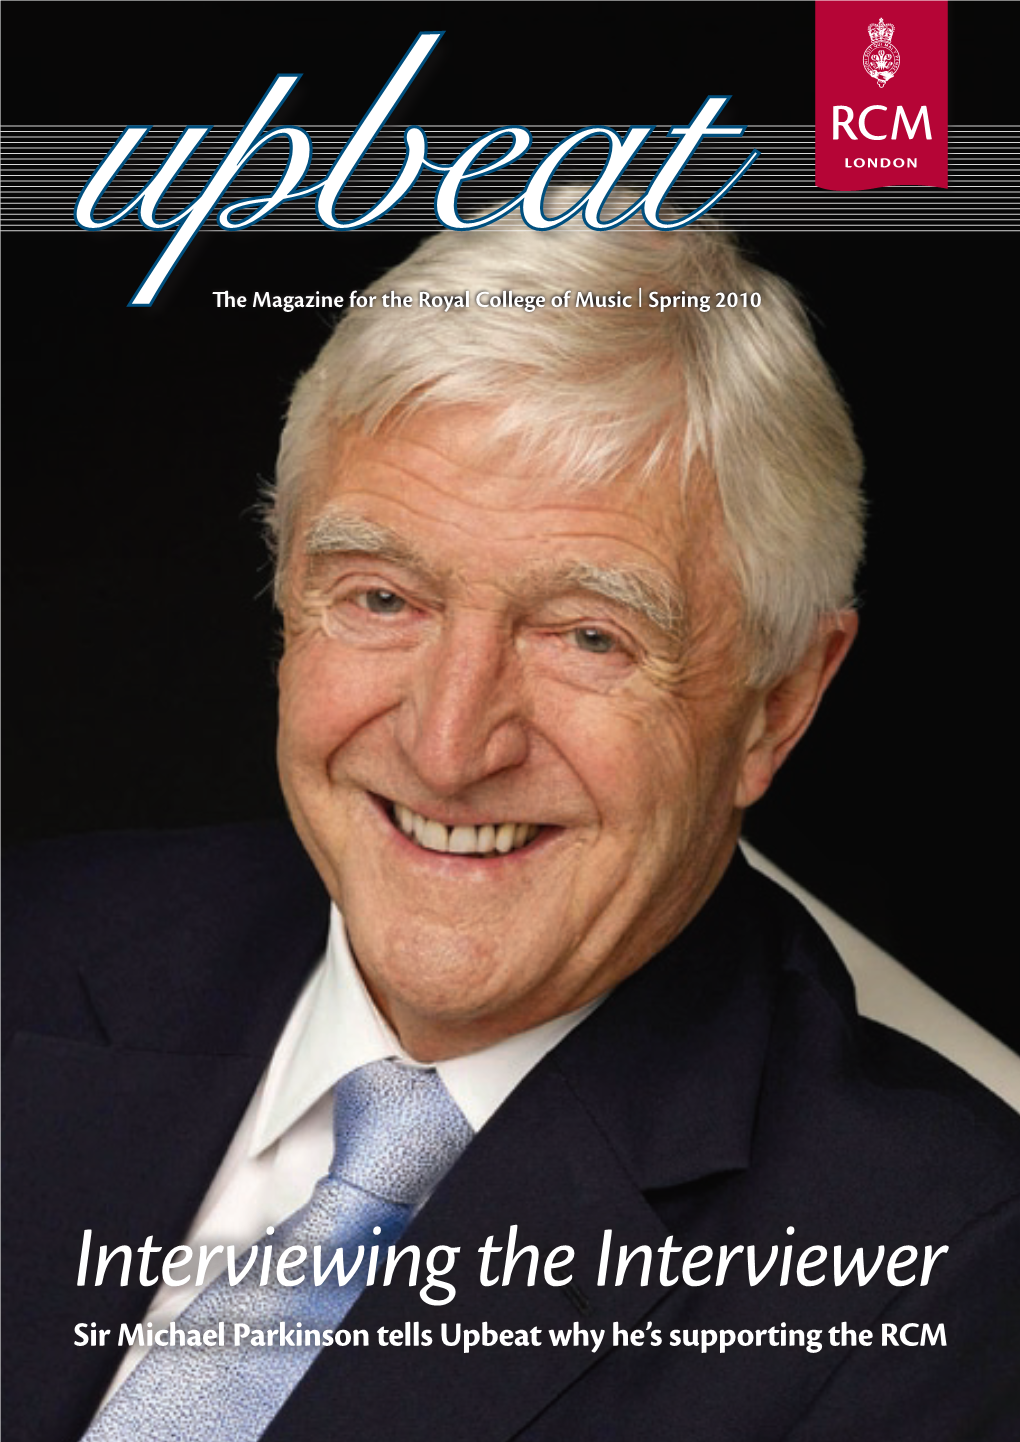 Interviewing the Interviewer Sir Michael Parkinson Tells Upbeat Why He’S Supporting the RCM